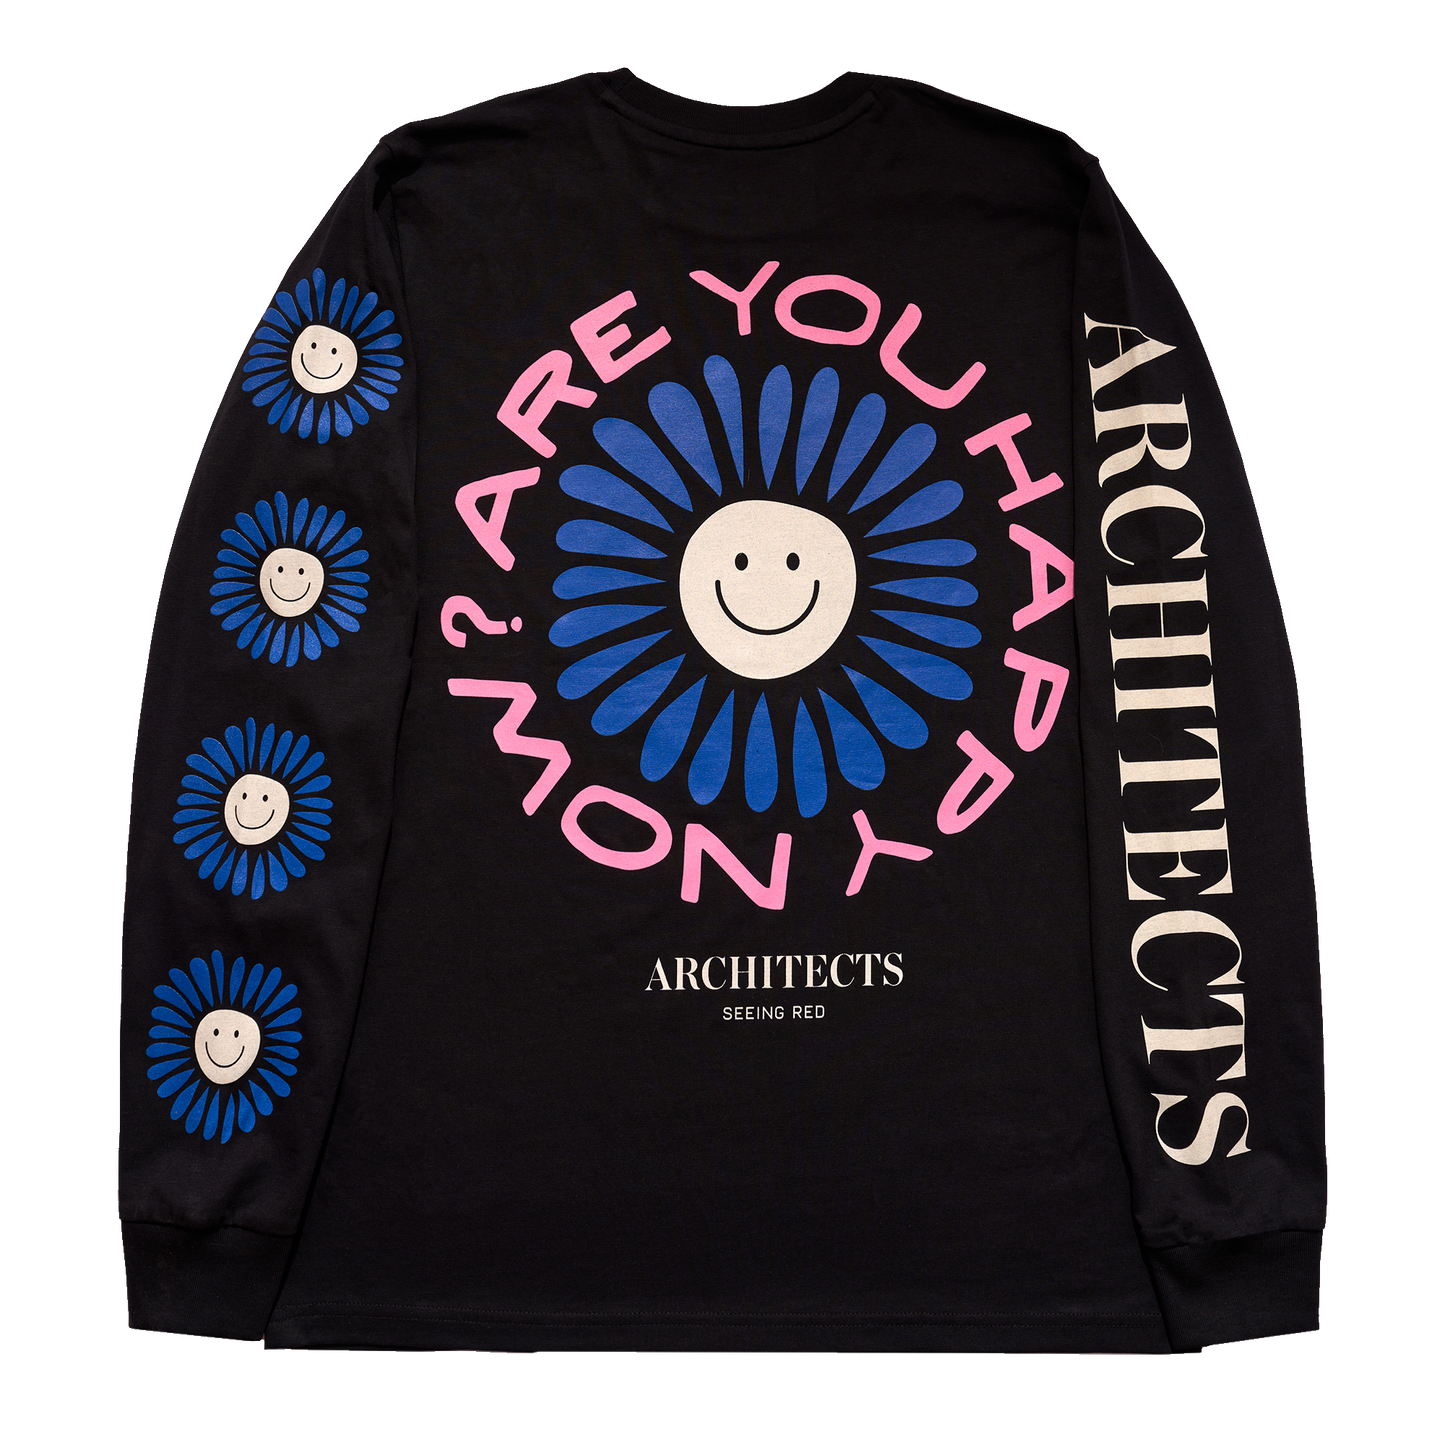 Are You Happy Now? Black Longsleeve